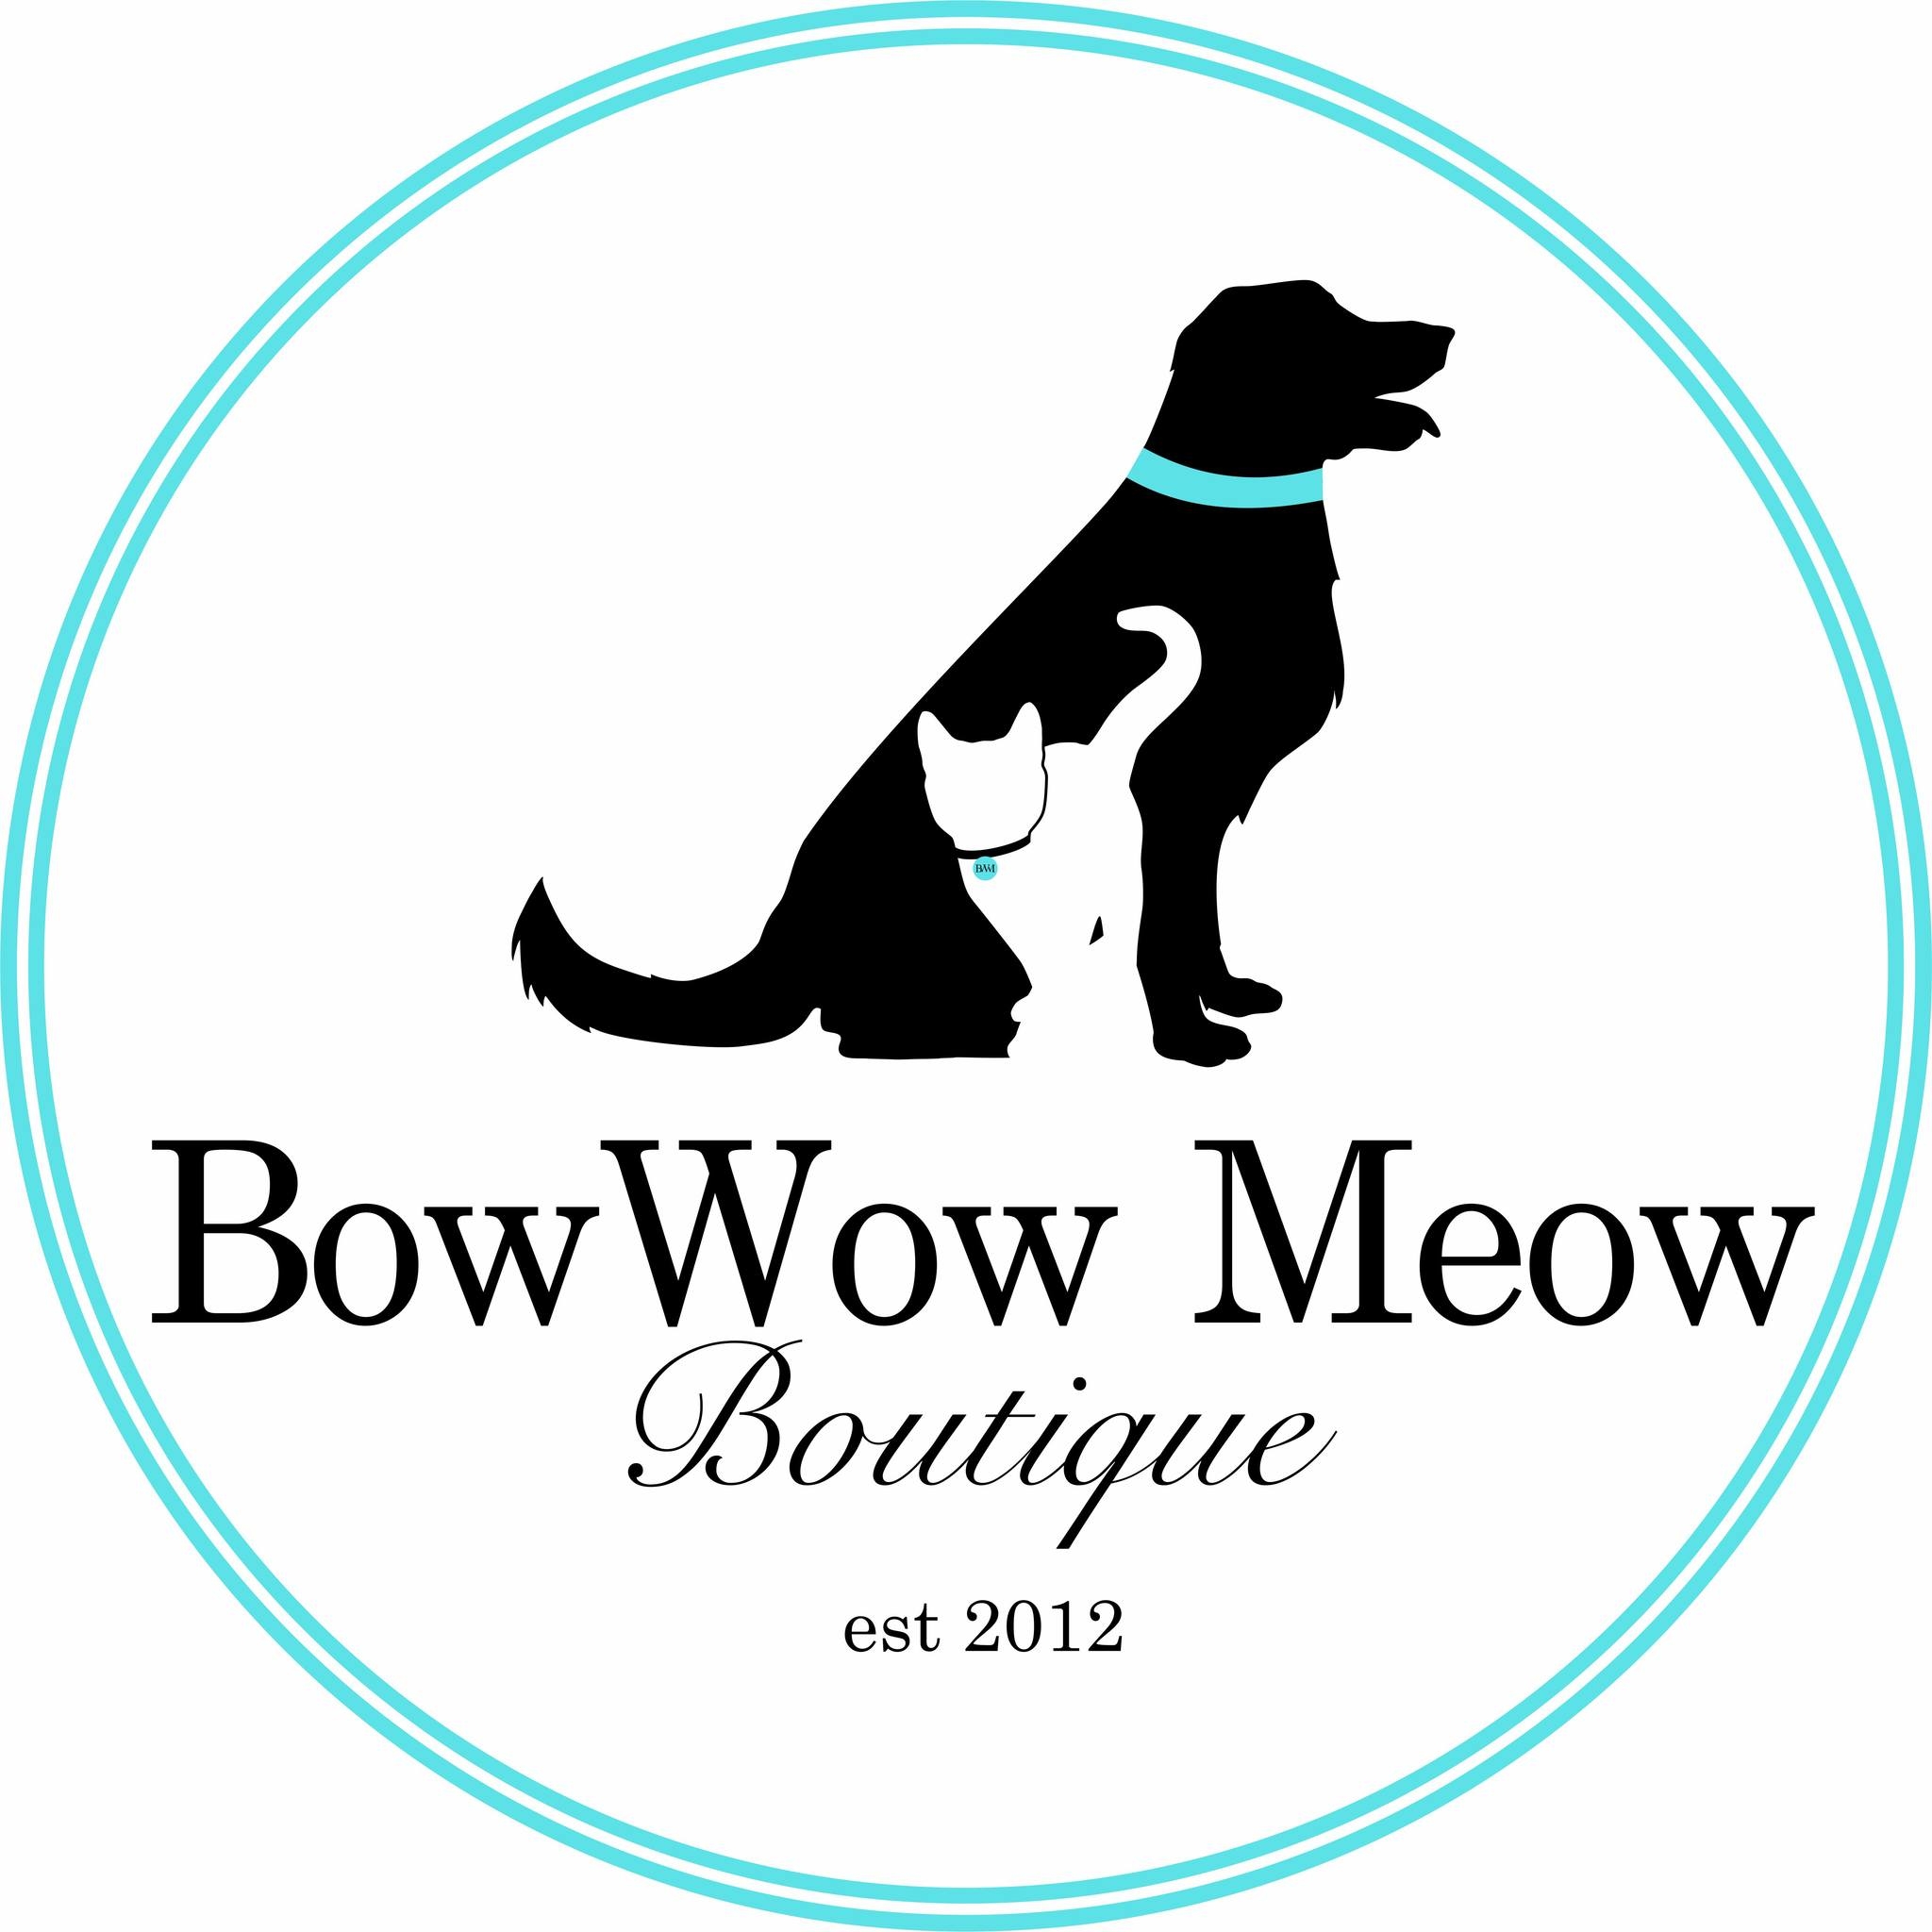 Bow Wow Meow Boutique